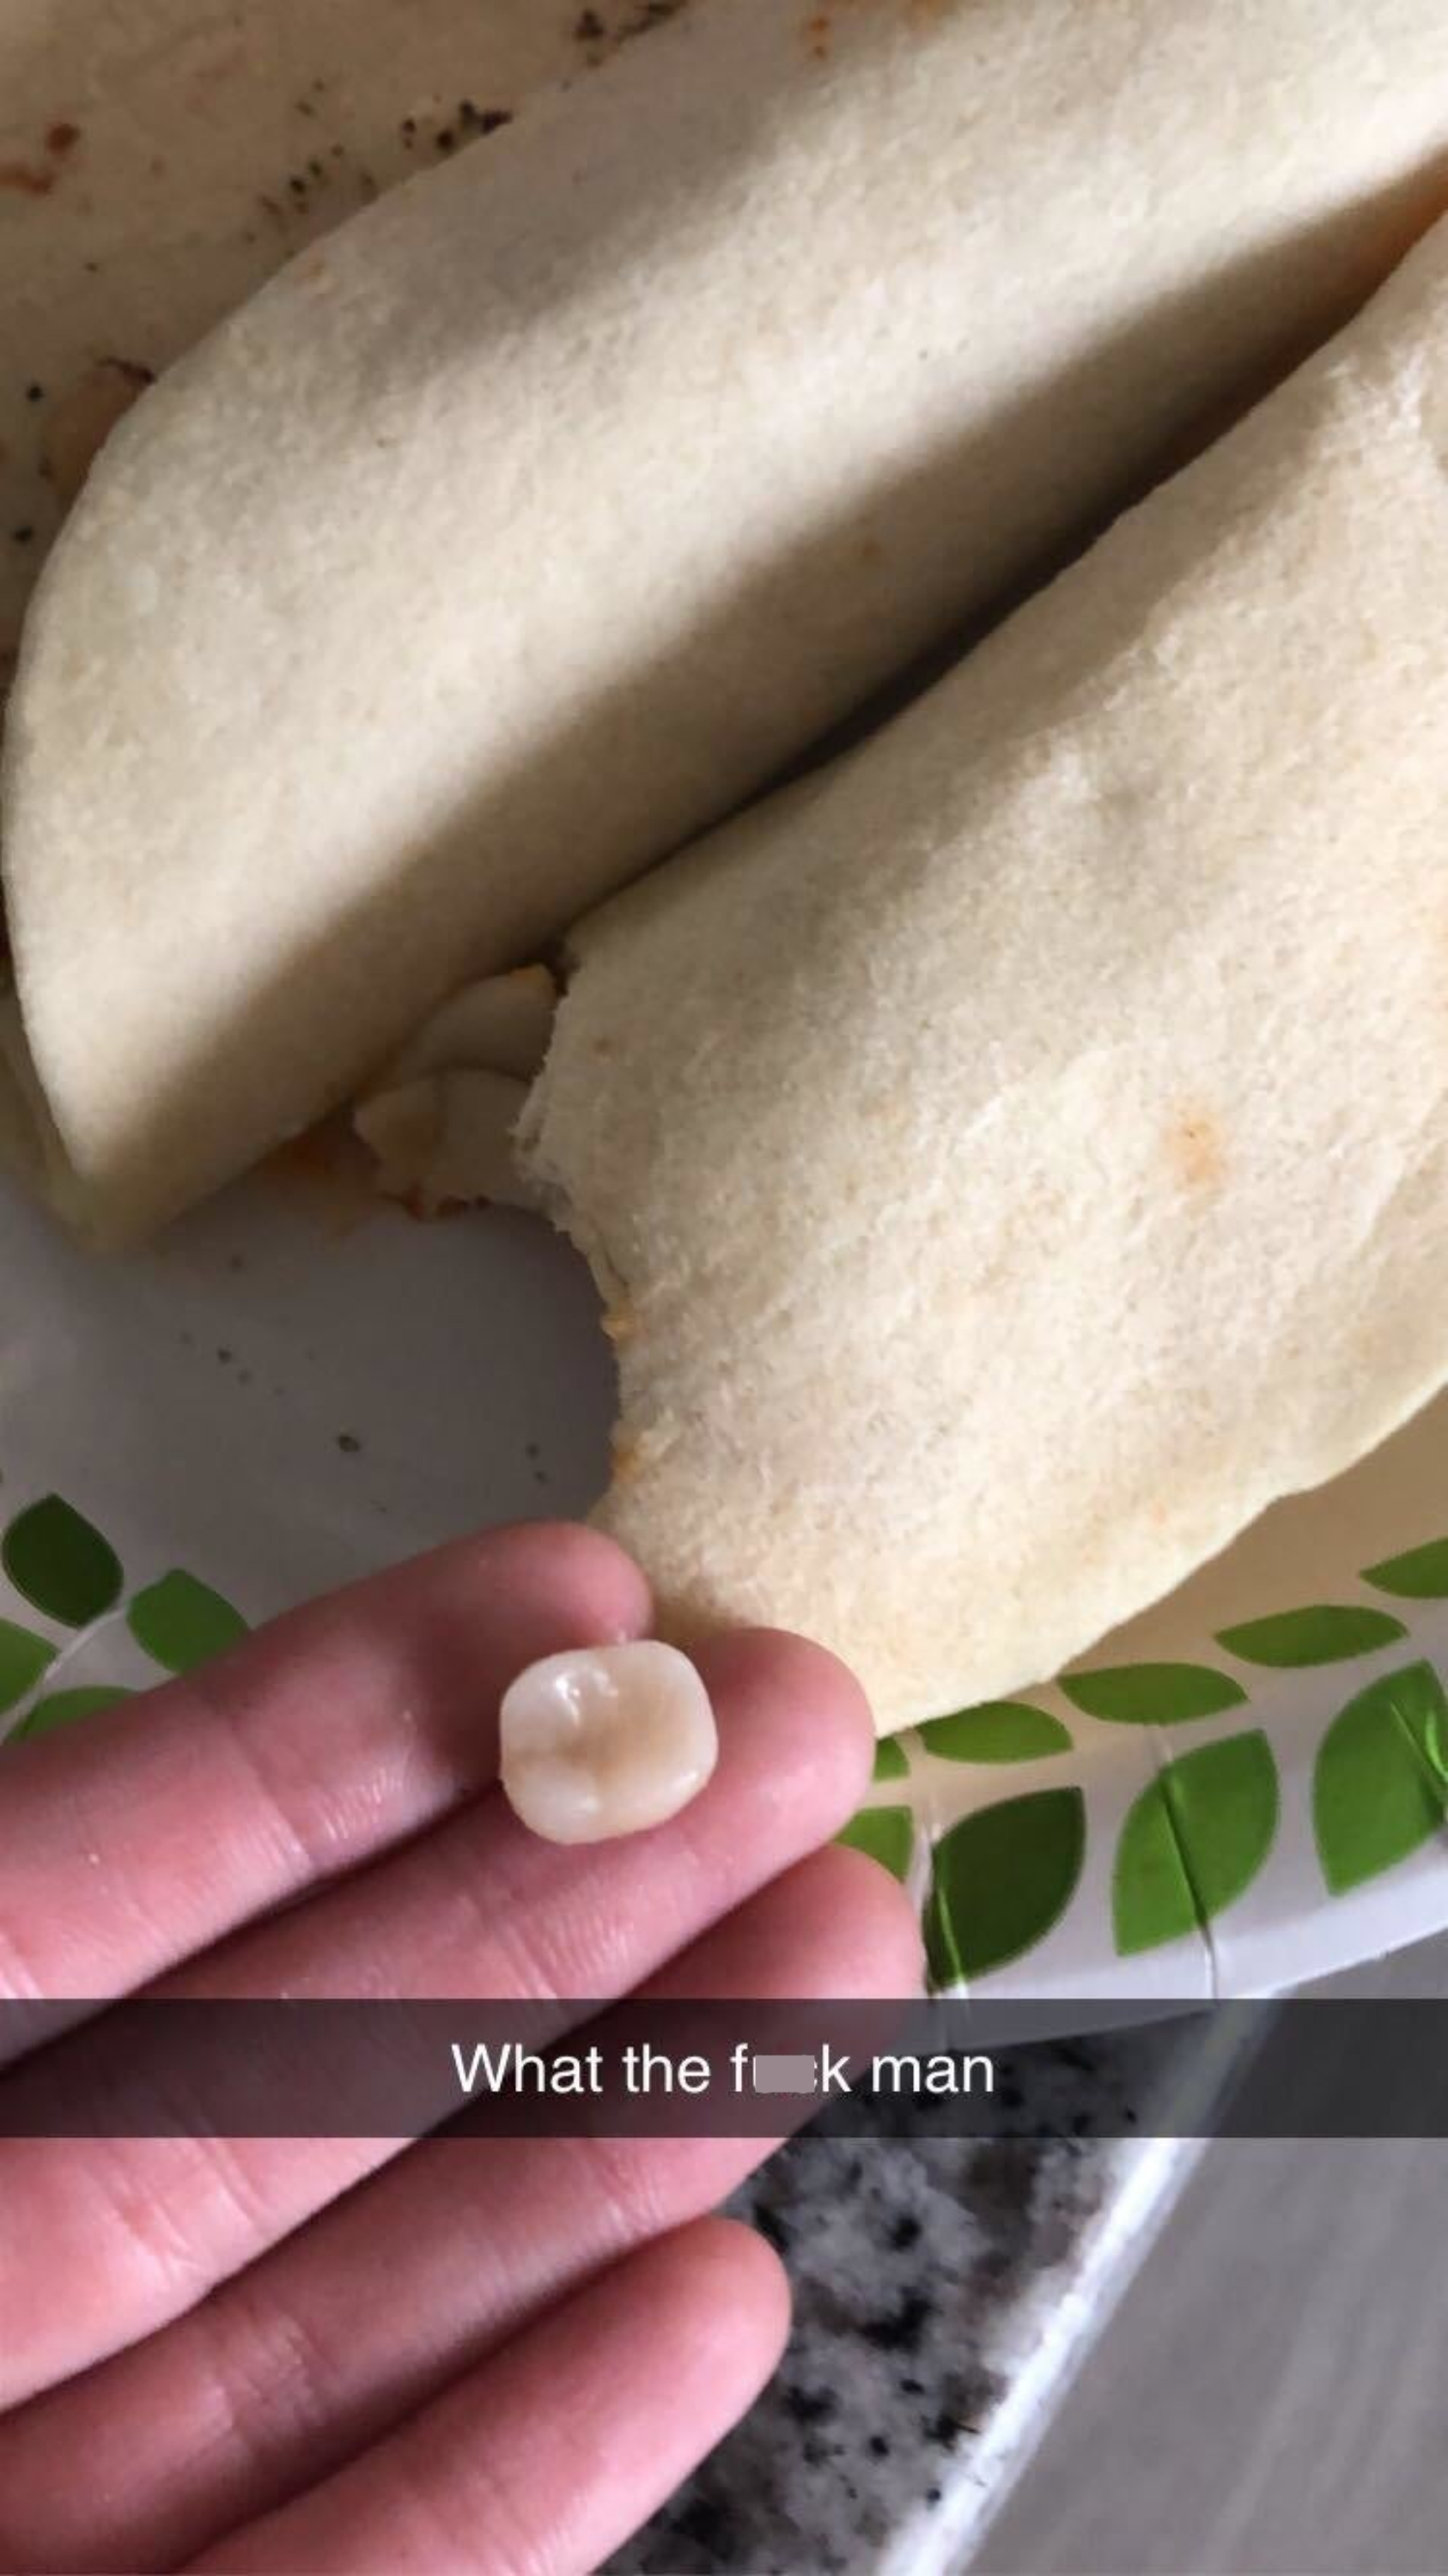 A person holds up a broken tooth above two flour tortillas